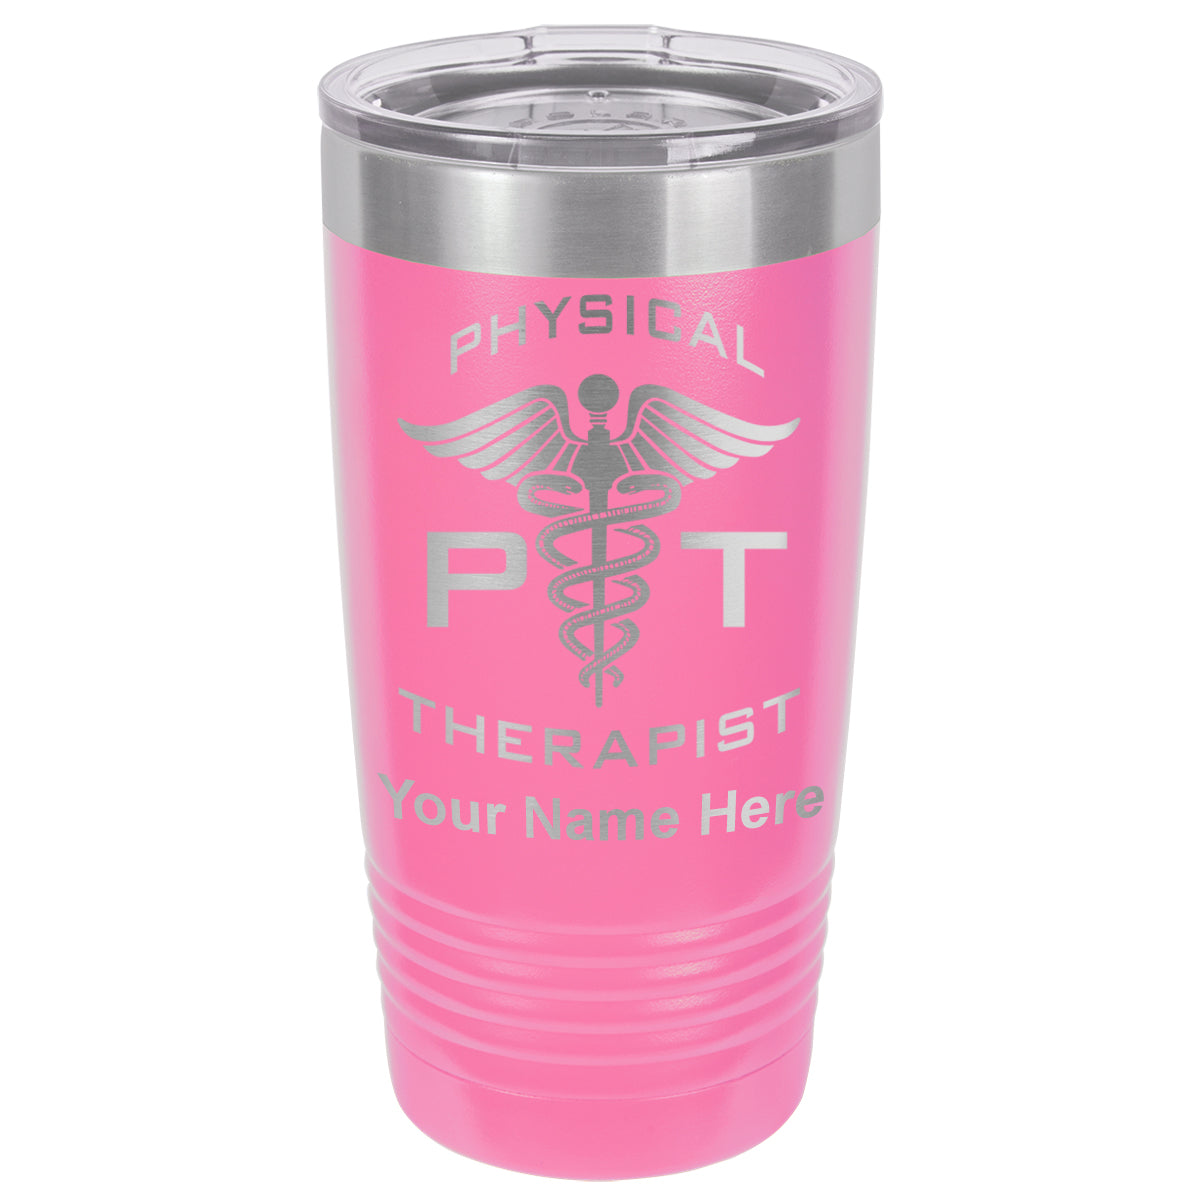 20oz Vacuum Insulated Tumbler Mug, PT Physical Therapist, Personalized Engraving Included